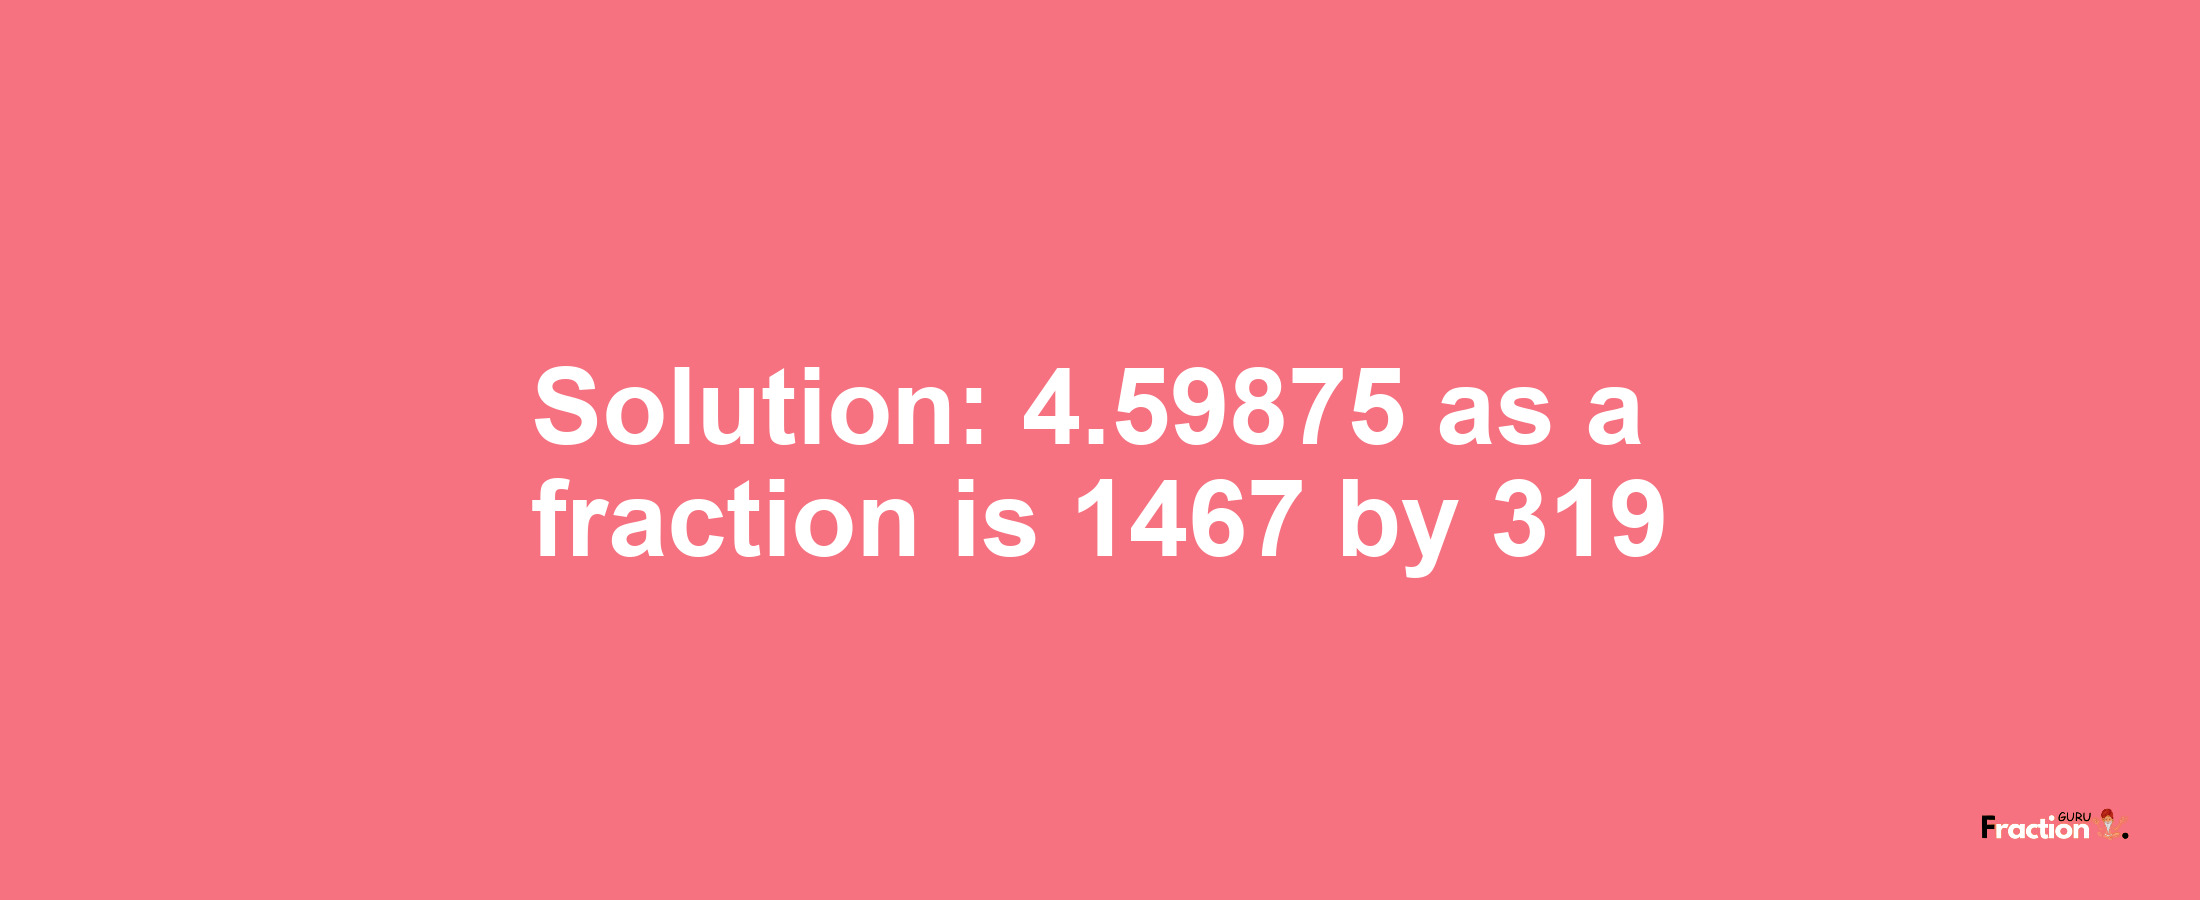 Solution:4.59875 as a fraction is 1467/319